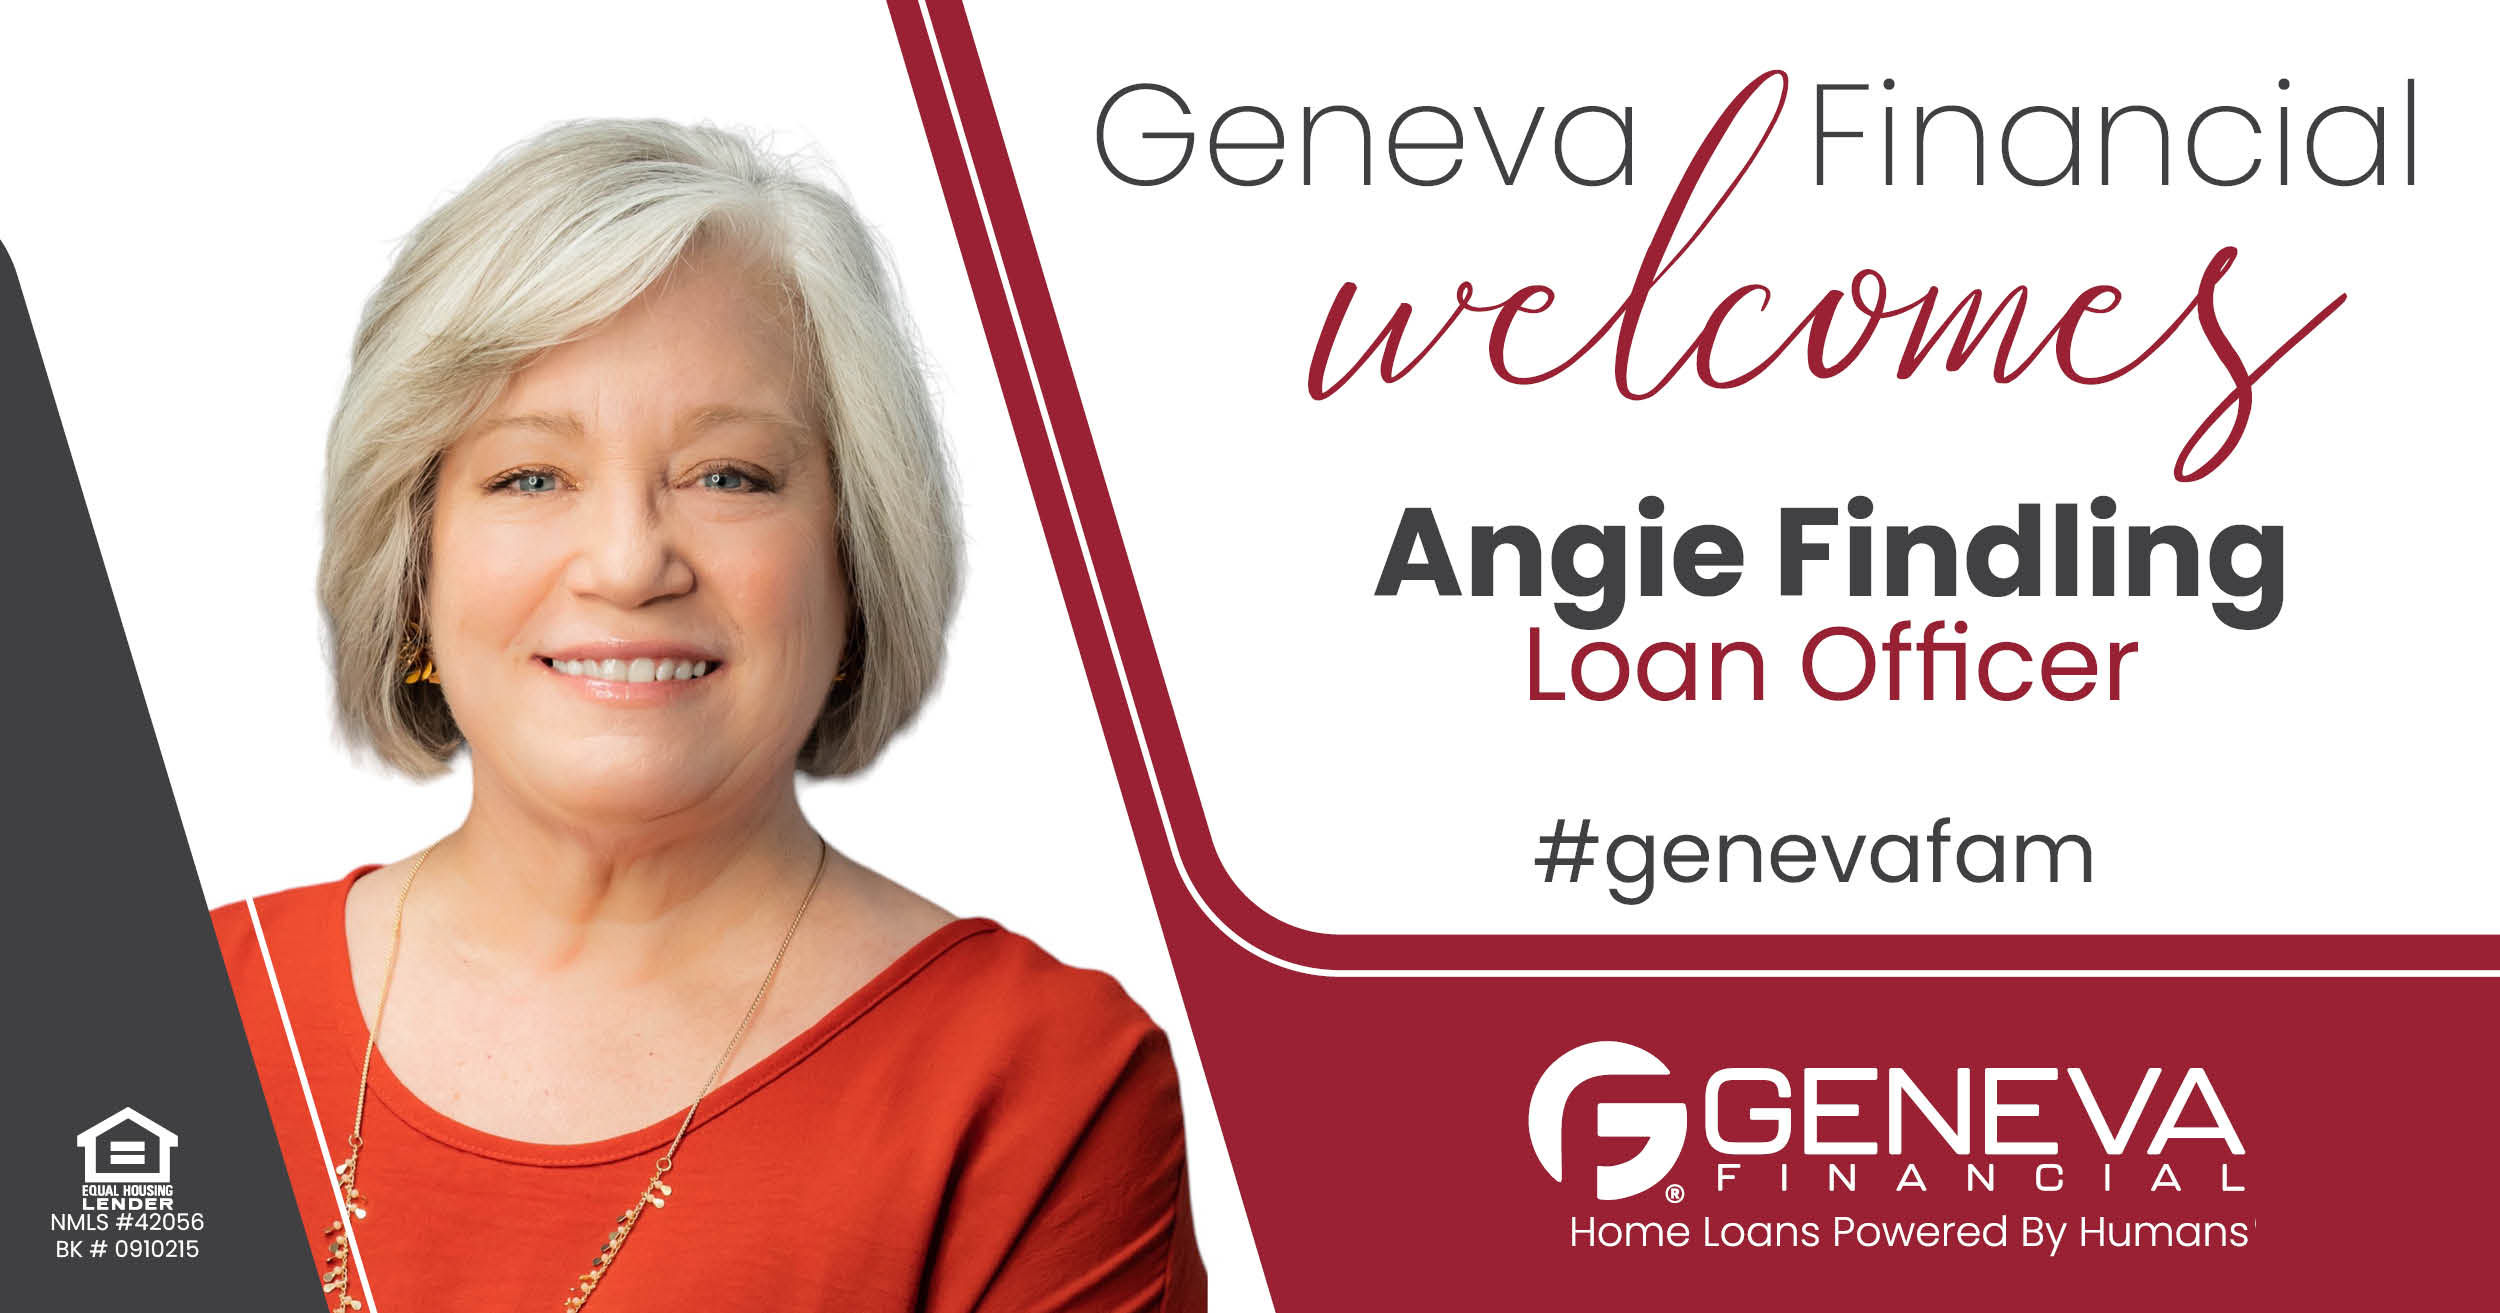 Geneva Financial Welcomes Loan Officer Angie Findling to St. Louis, Missouri – Home Loans Powered by Humans®.